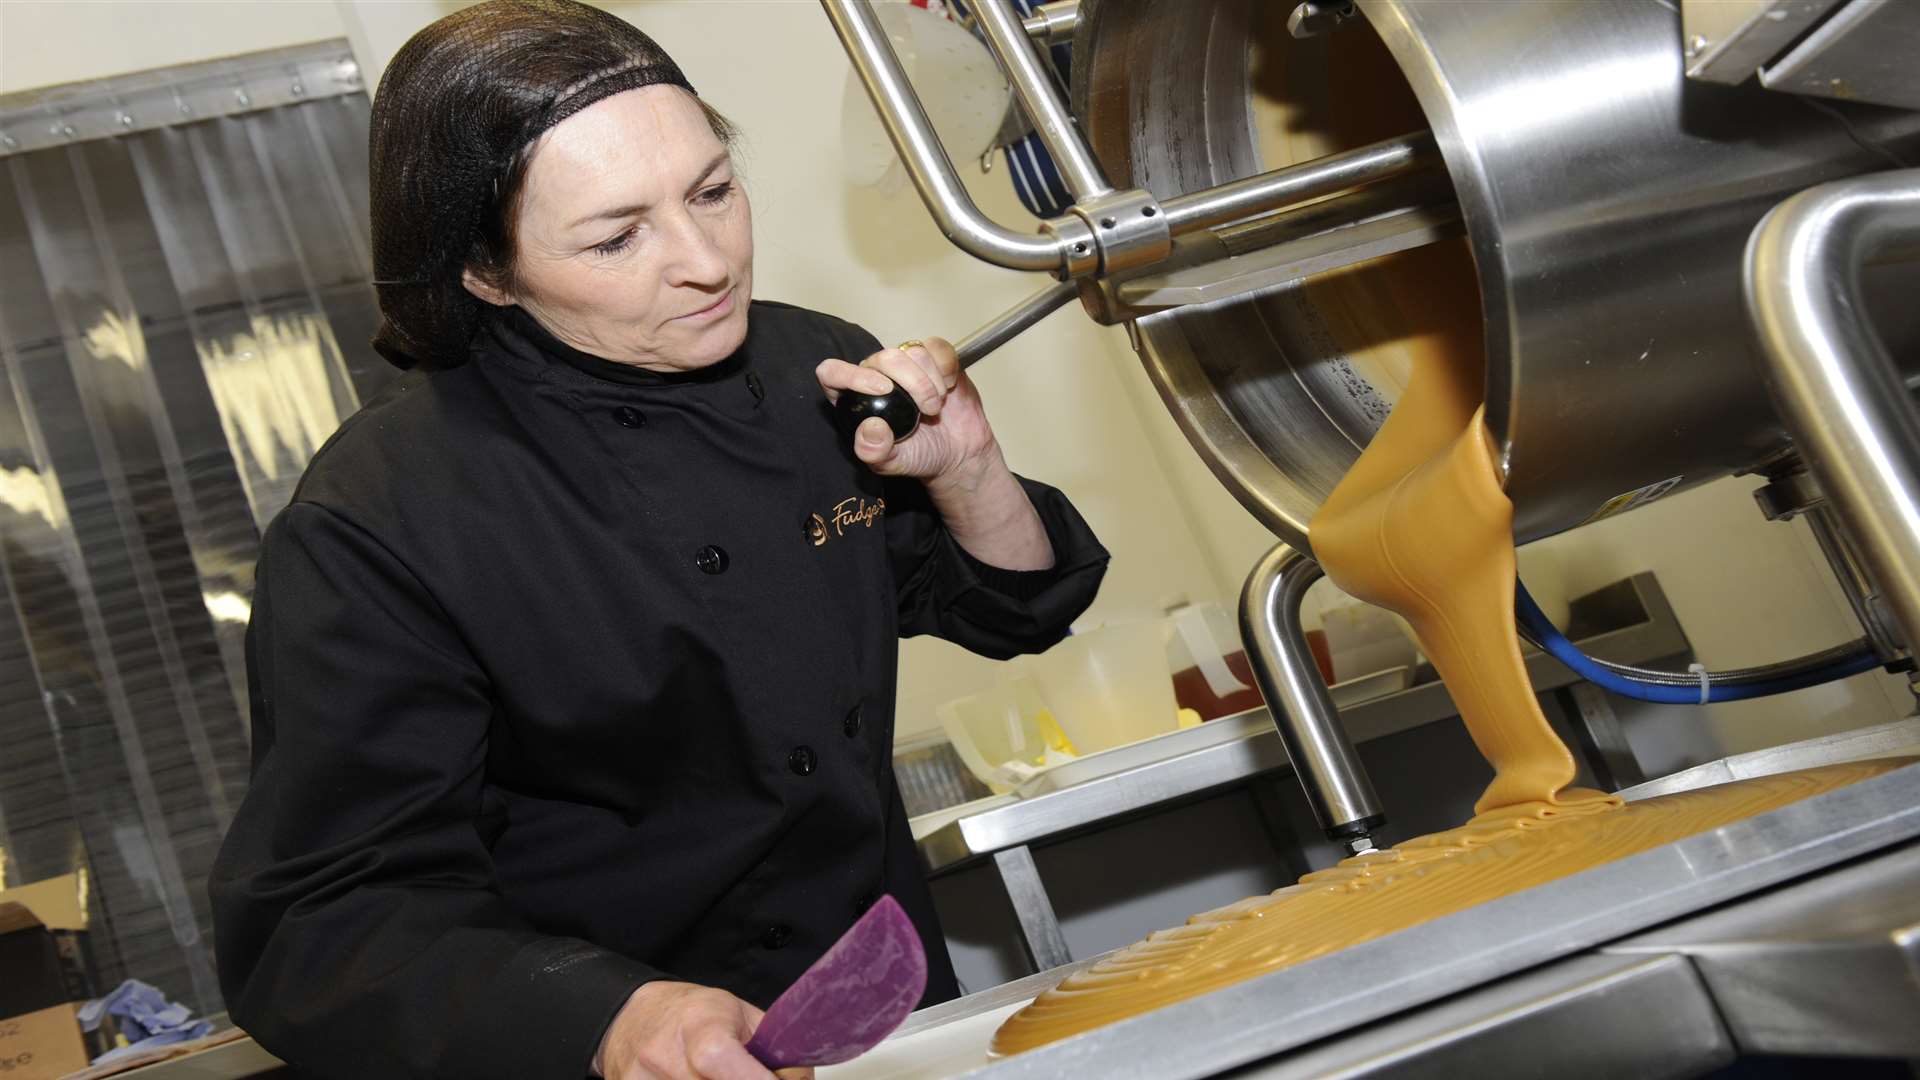 Fudge Kitchen is nominated for Manufacturing Business of the Year